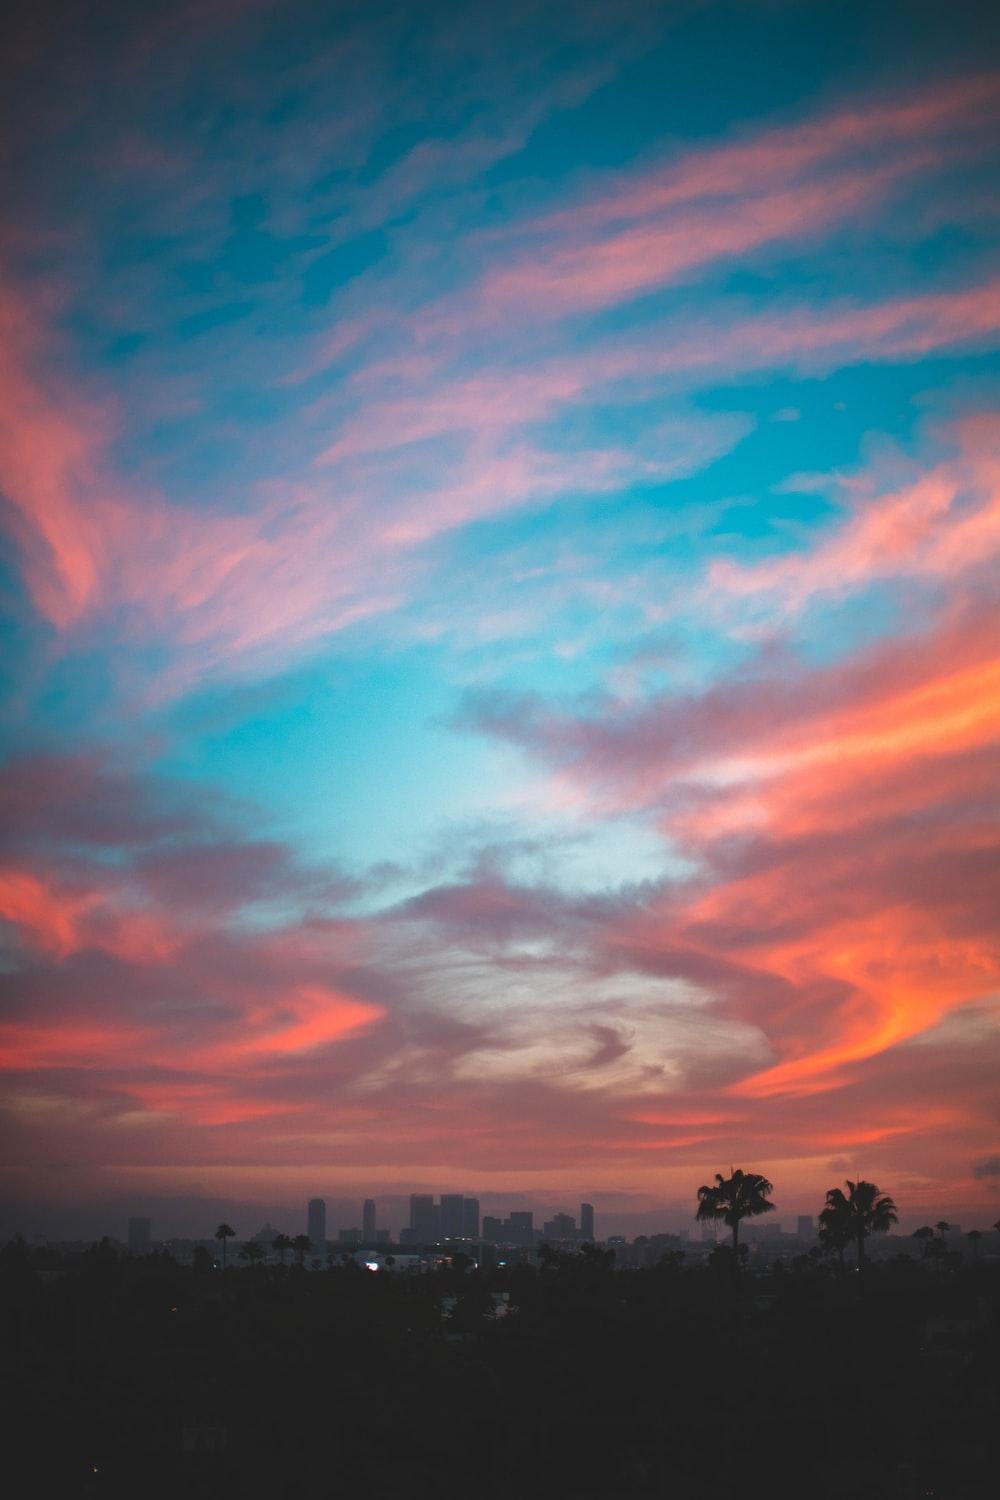 Sunset Cloud Picture [Stunning!]. Download Free